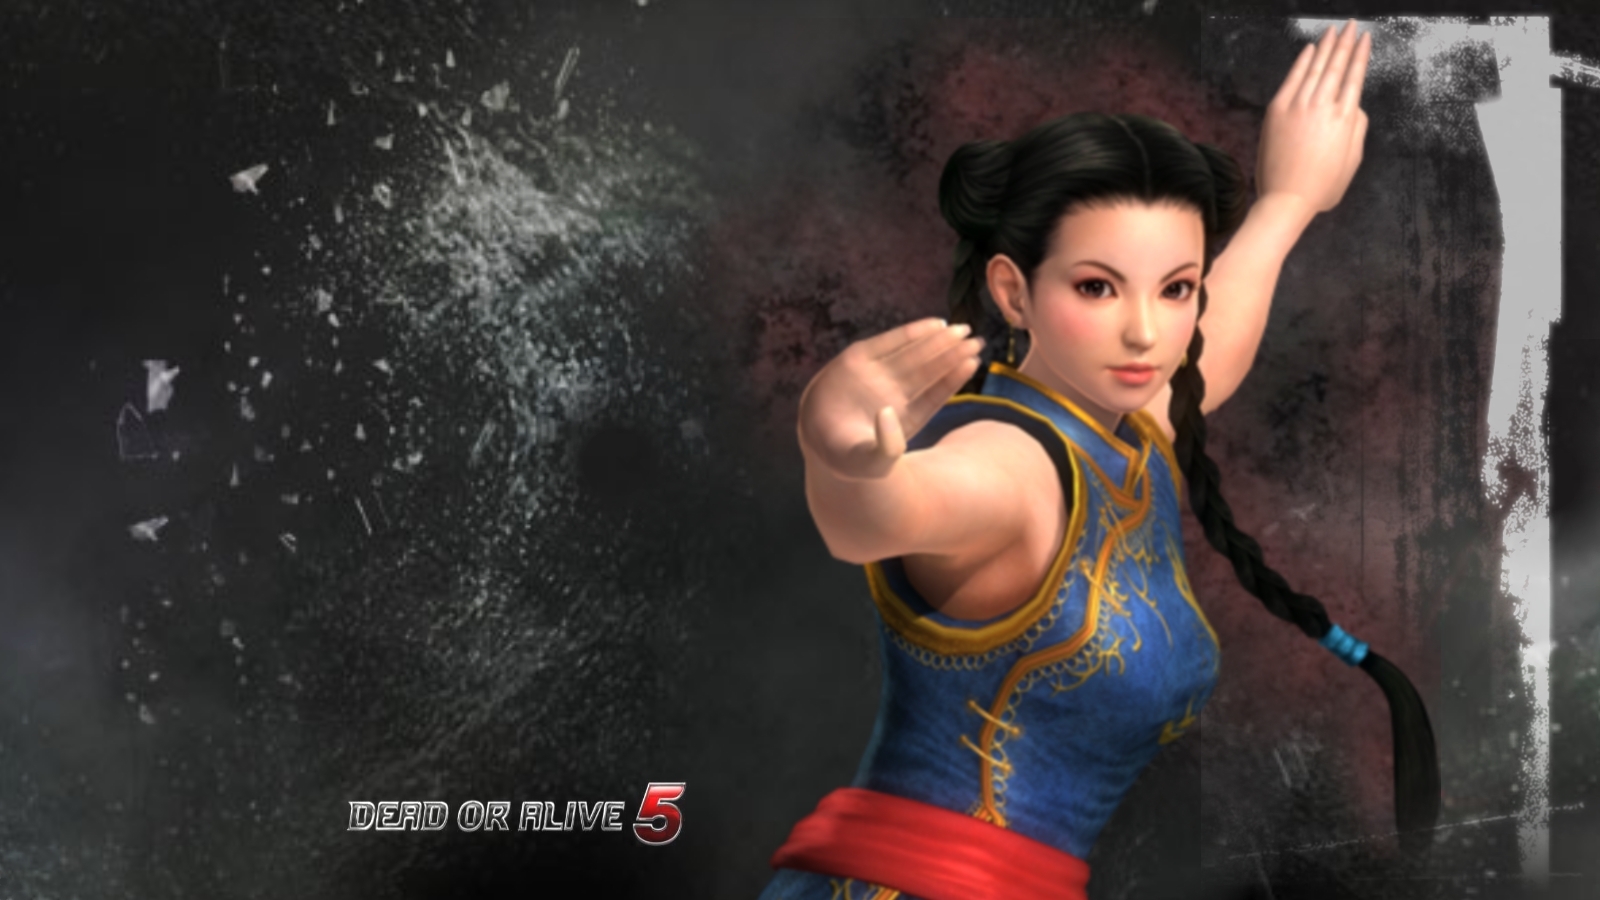 Rendered Bits: Fanmade Dead or Alive 5 Game Wallpaper